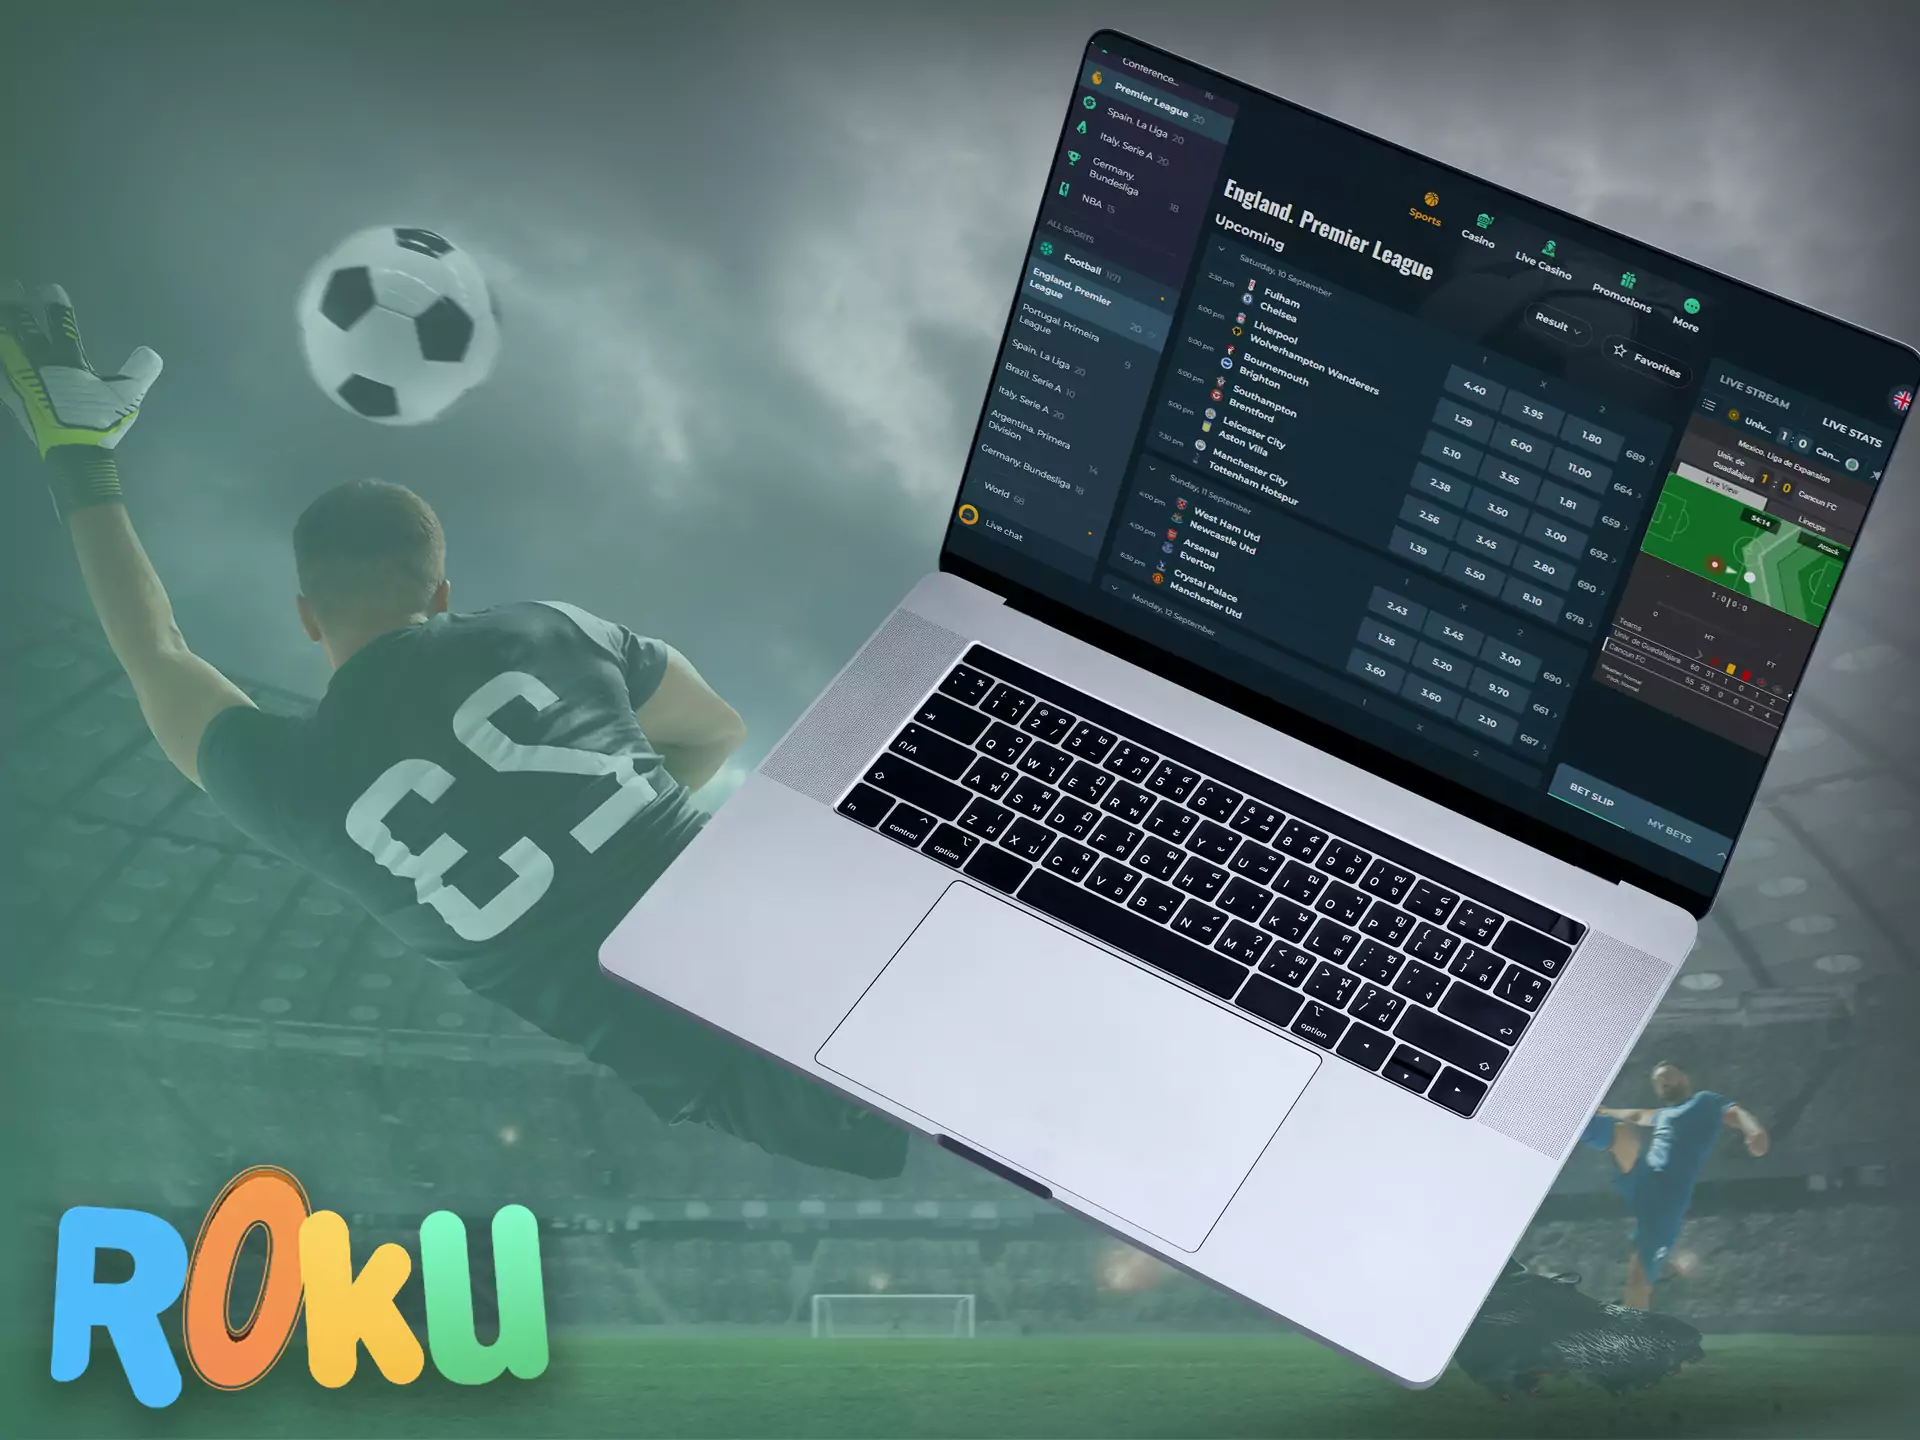 Among sports events on Rokubet, there are lots of football matches as well.